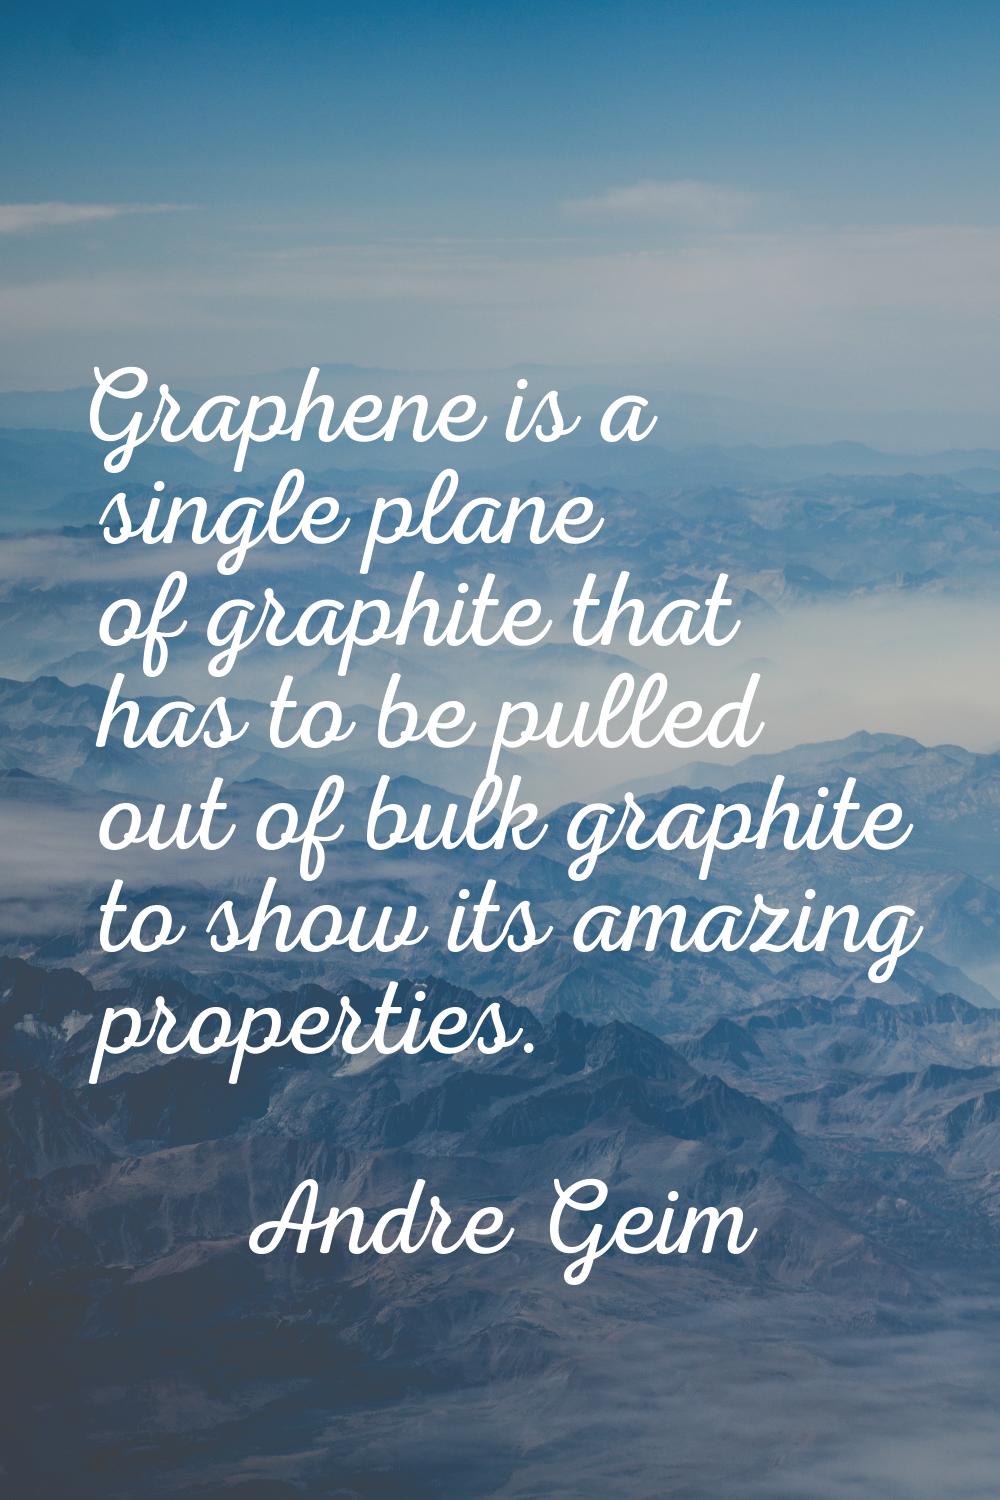 Graphene is a single plane of graphite that has to be pulled out of bulk graphite to show its amazi